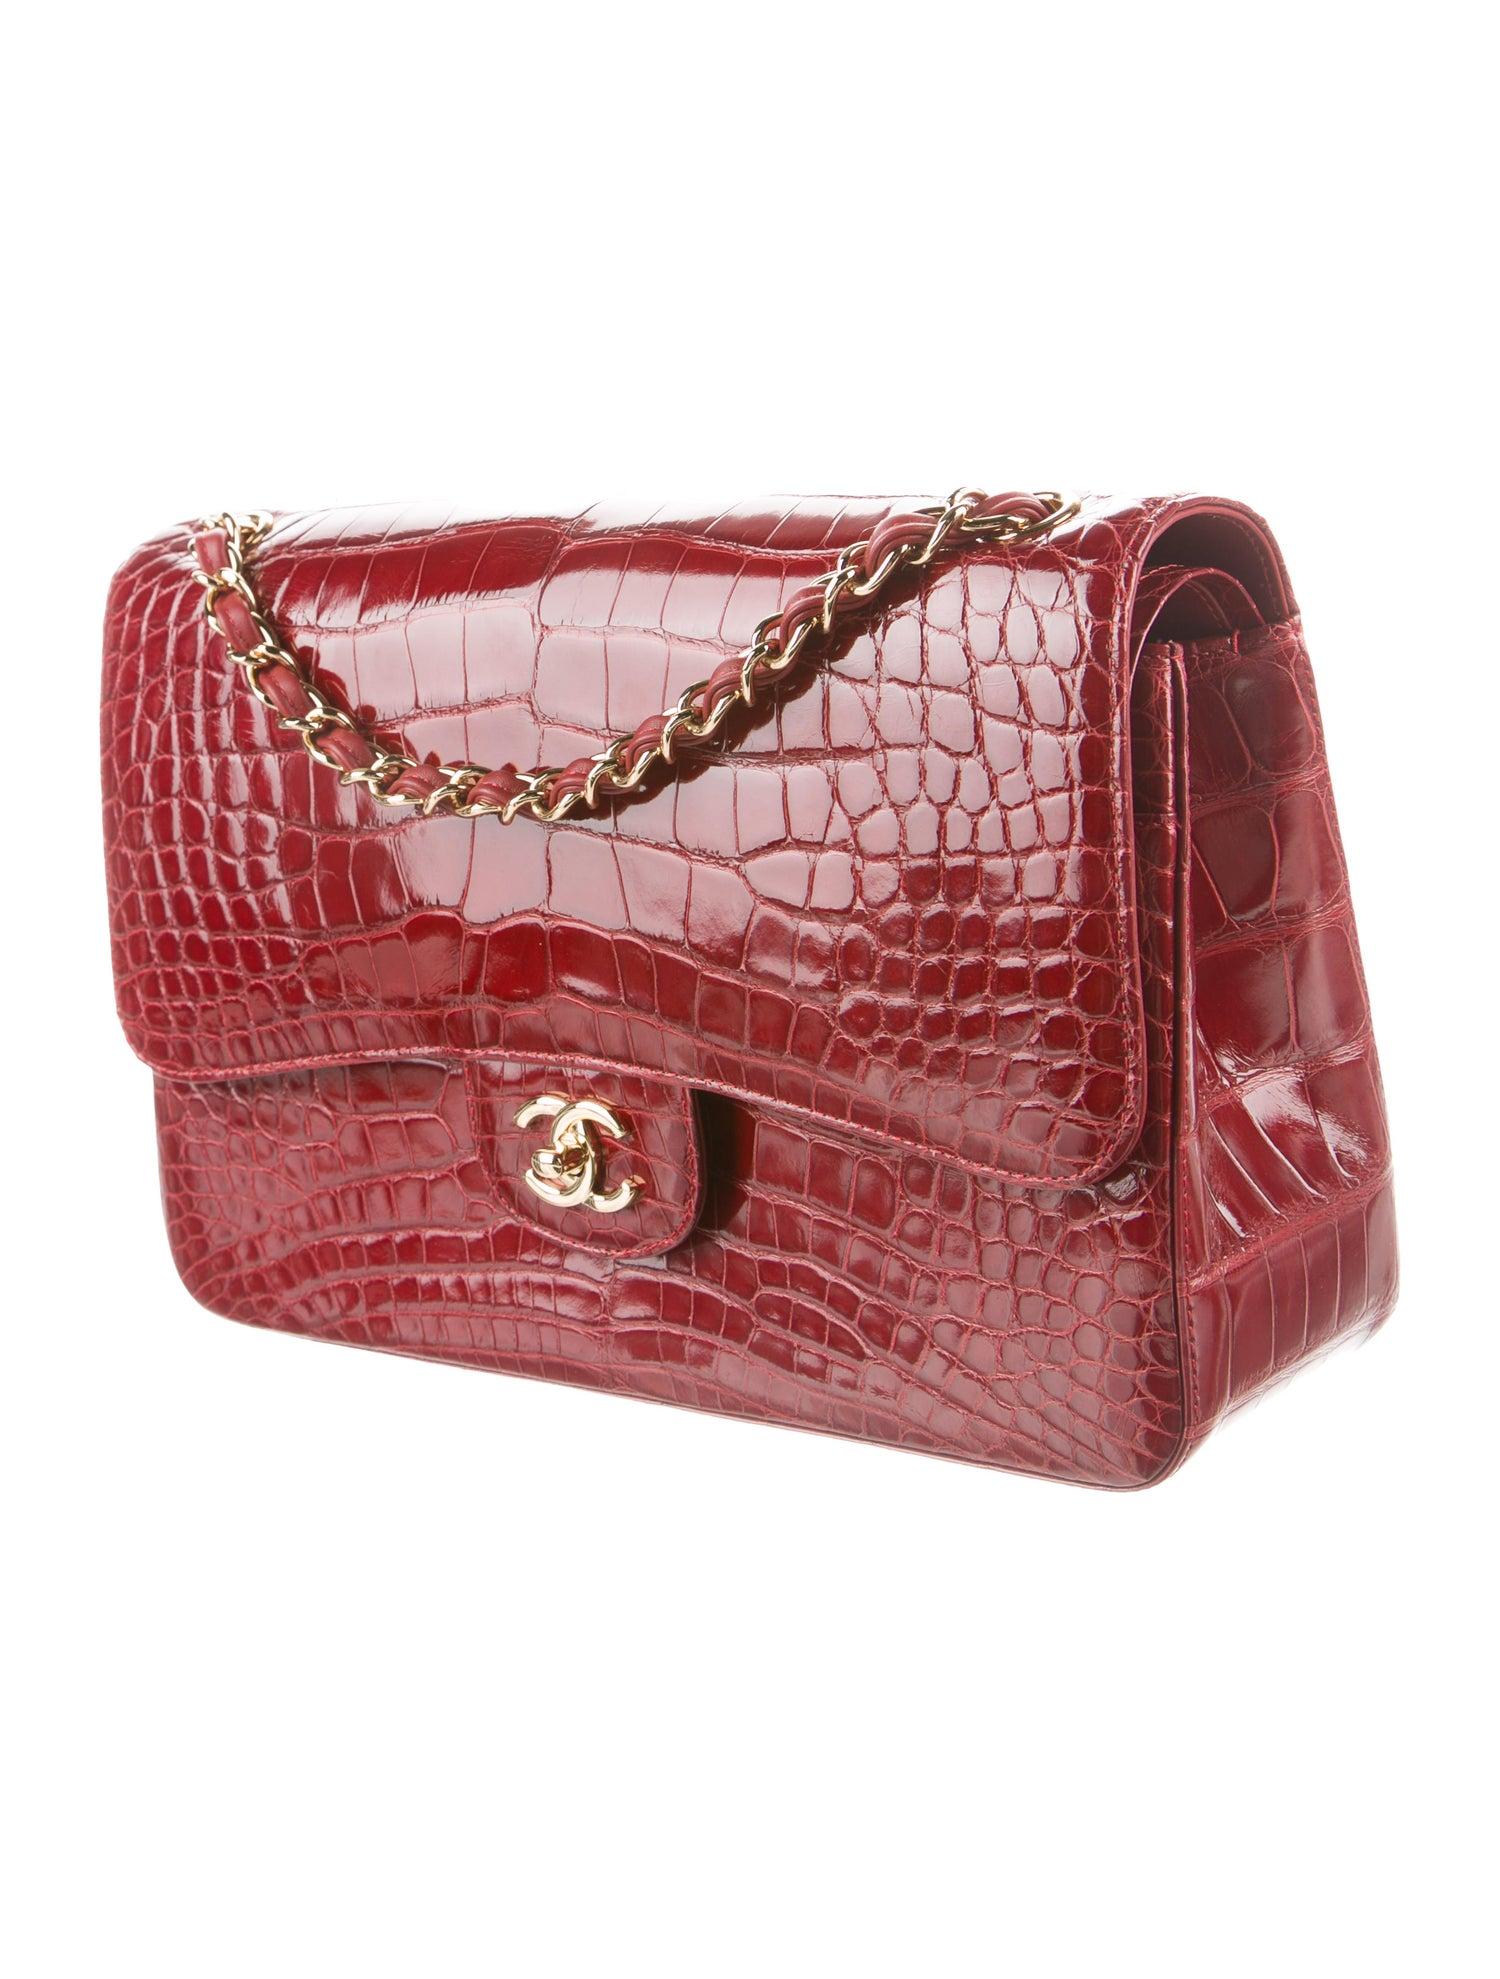 The Exotic Chanel You Need to Complement Your Collection.  

Since announcing the discontinuation of exotic skin handbags, the demand for exotic Chanel has increased tenfold. And the demand for alligator skin Chanel is no exception. Crafted of